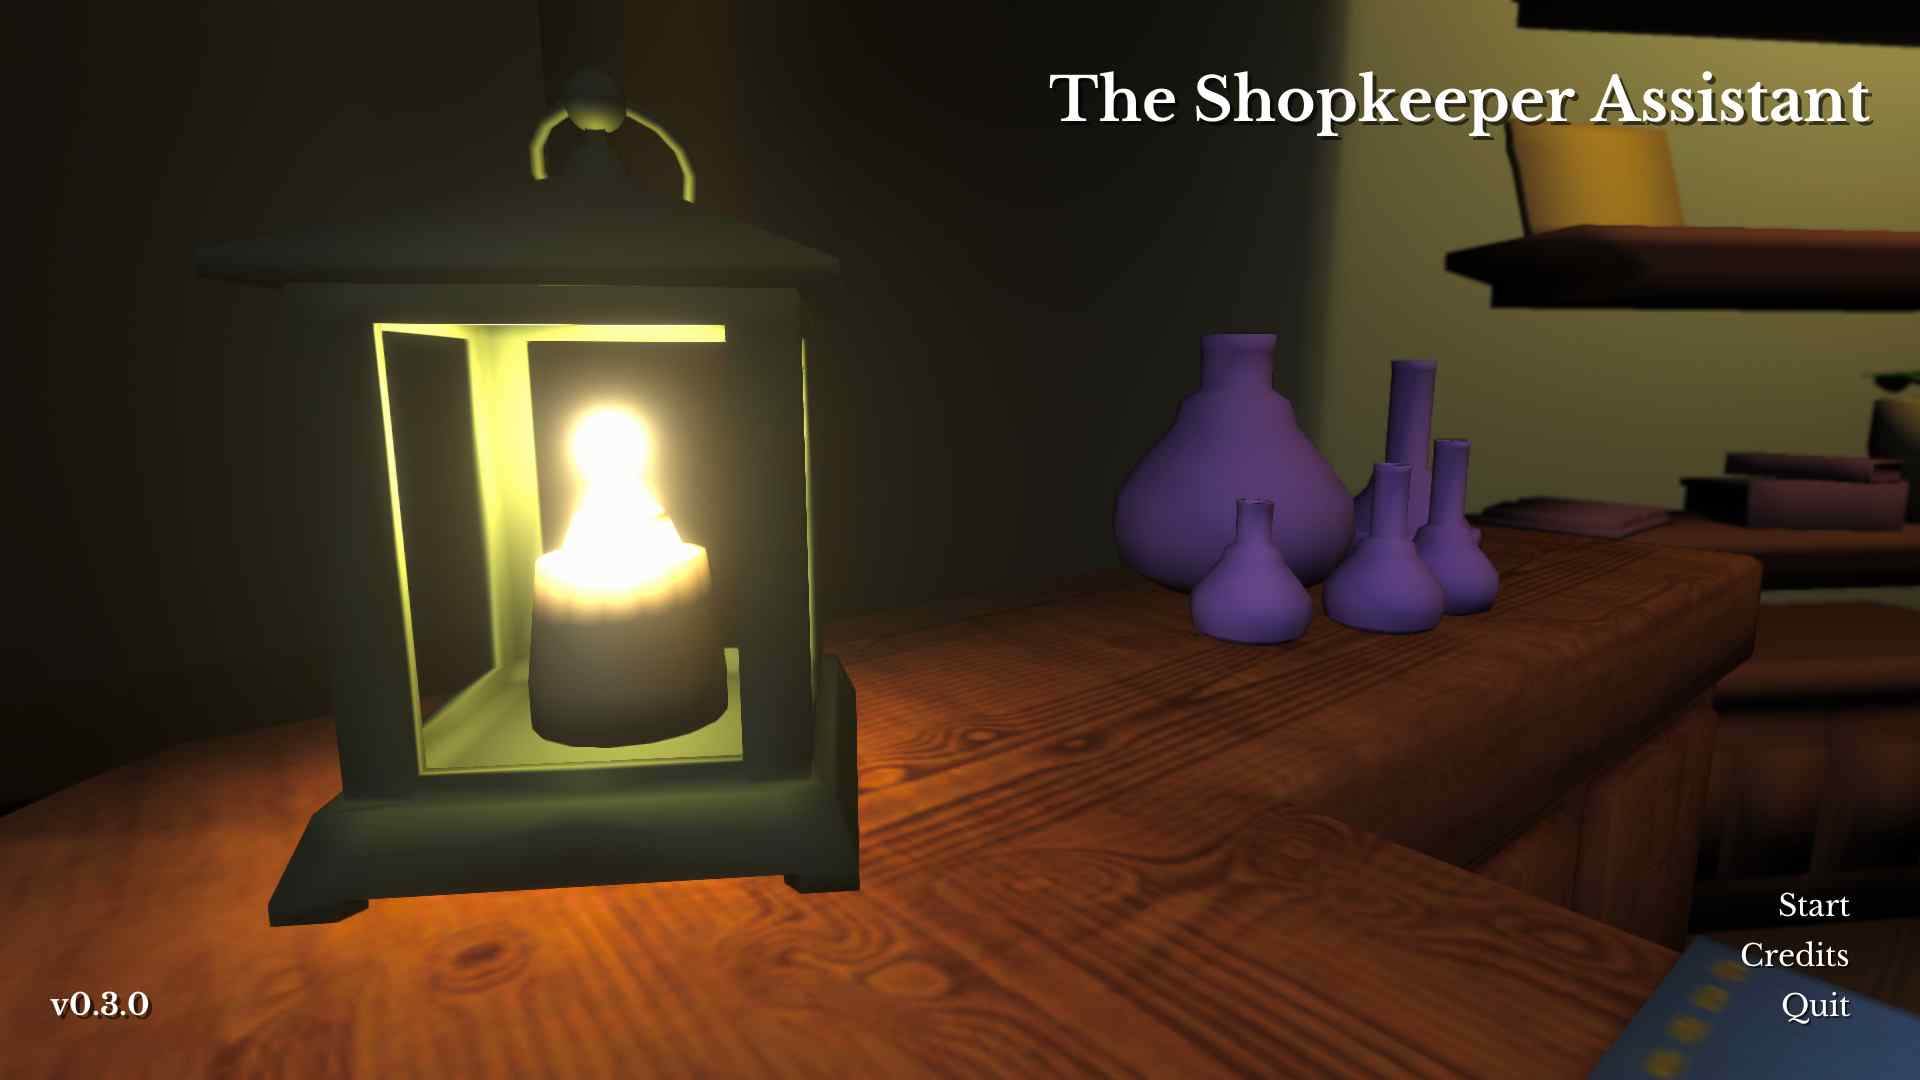 The Shopkeeper Assistant